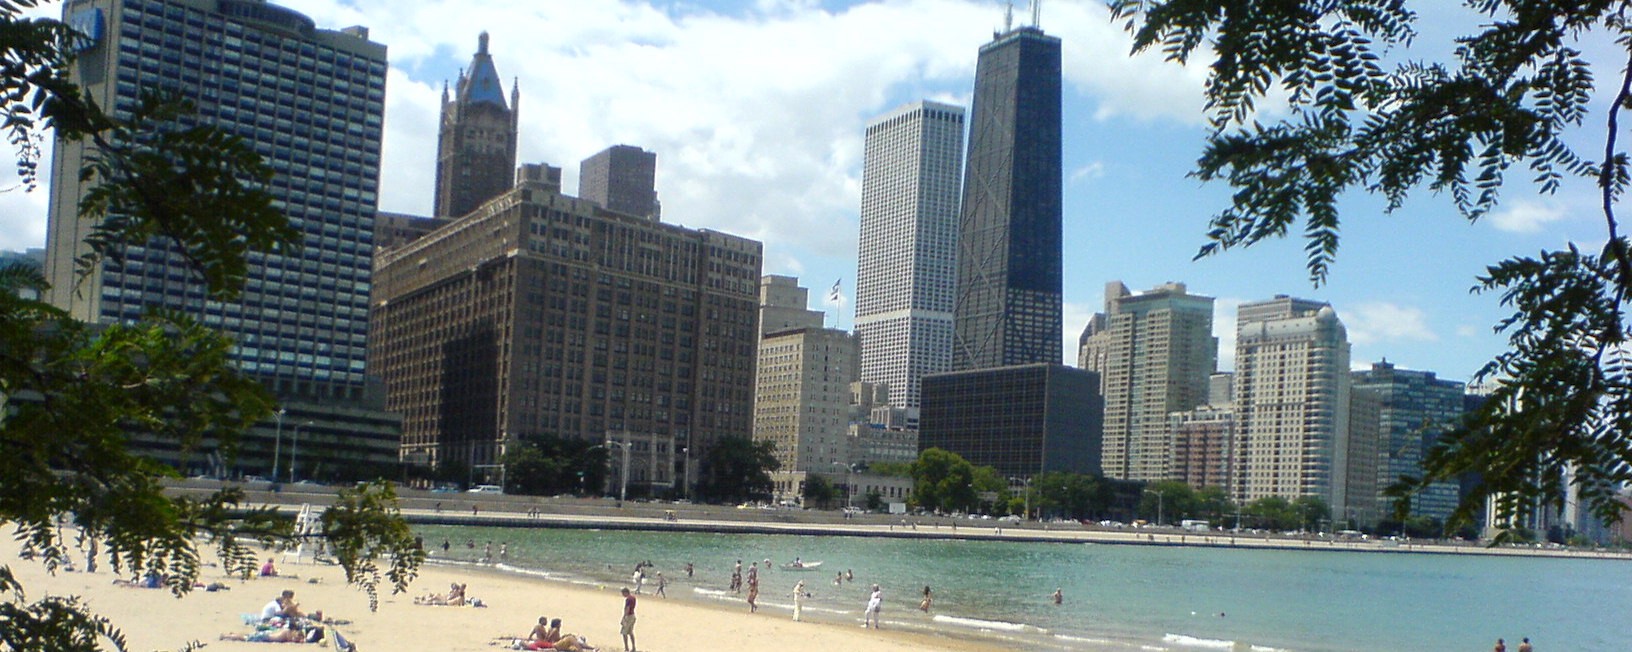 A beach in downtown Chicago, with sunbathers and swimmers.